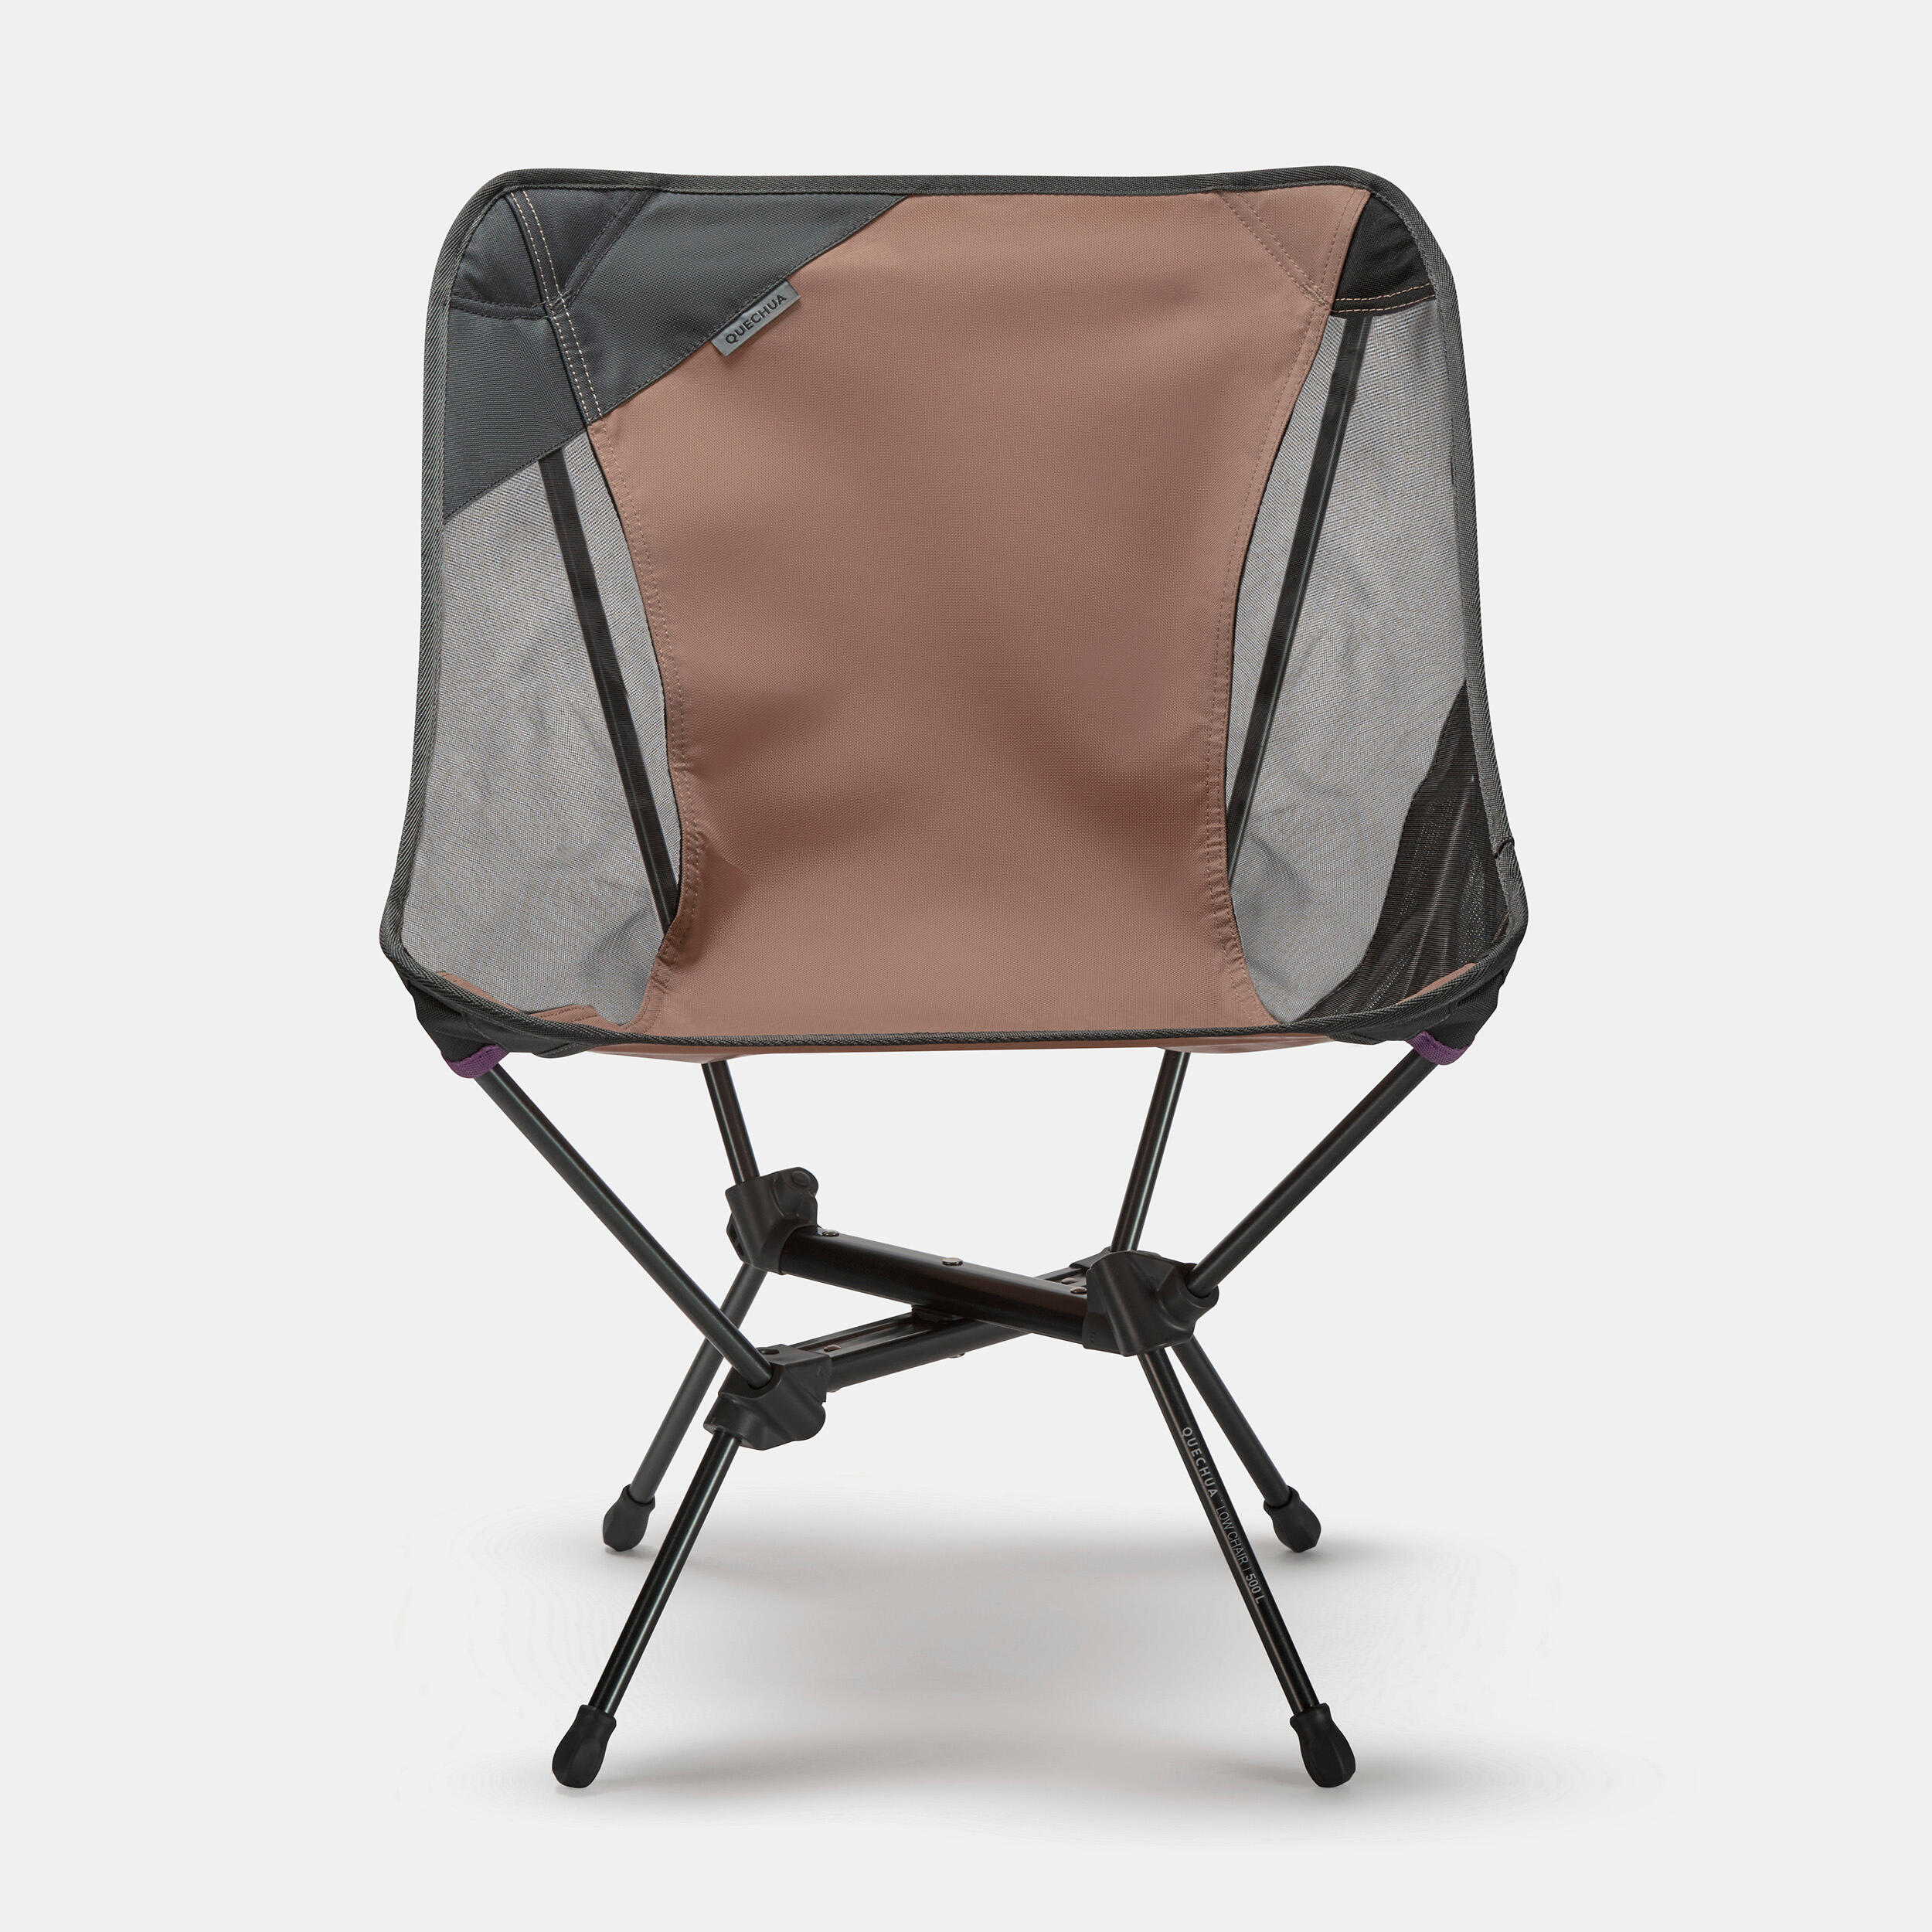 LOW FOLDING CAMPING CHAIR MH500 - BROWN 5/10